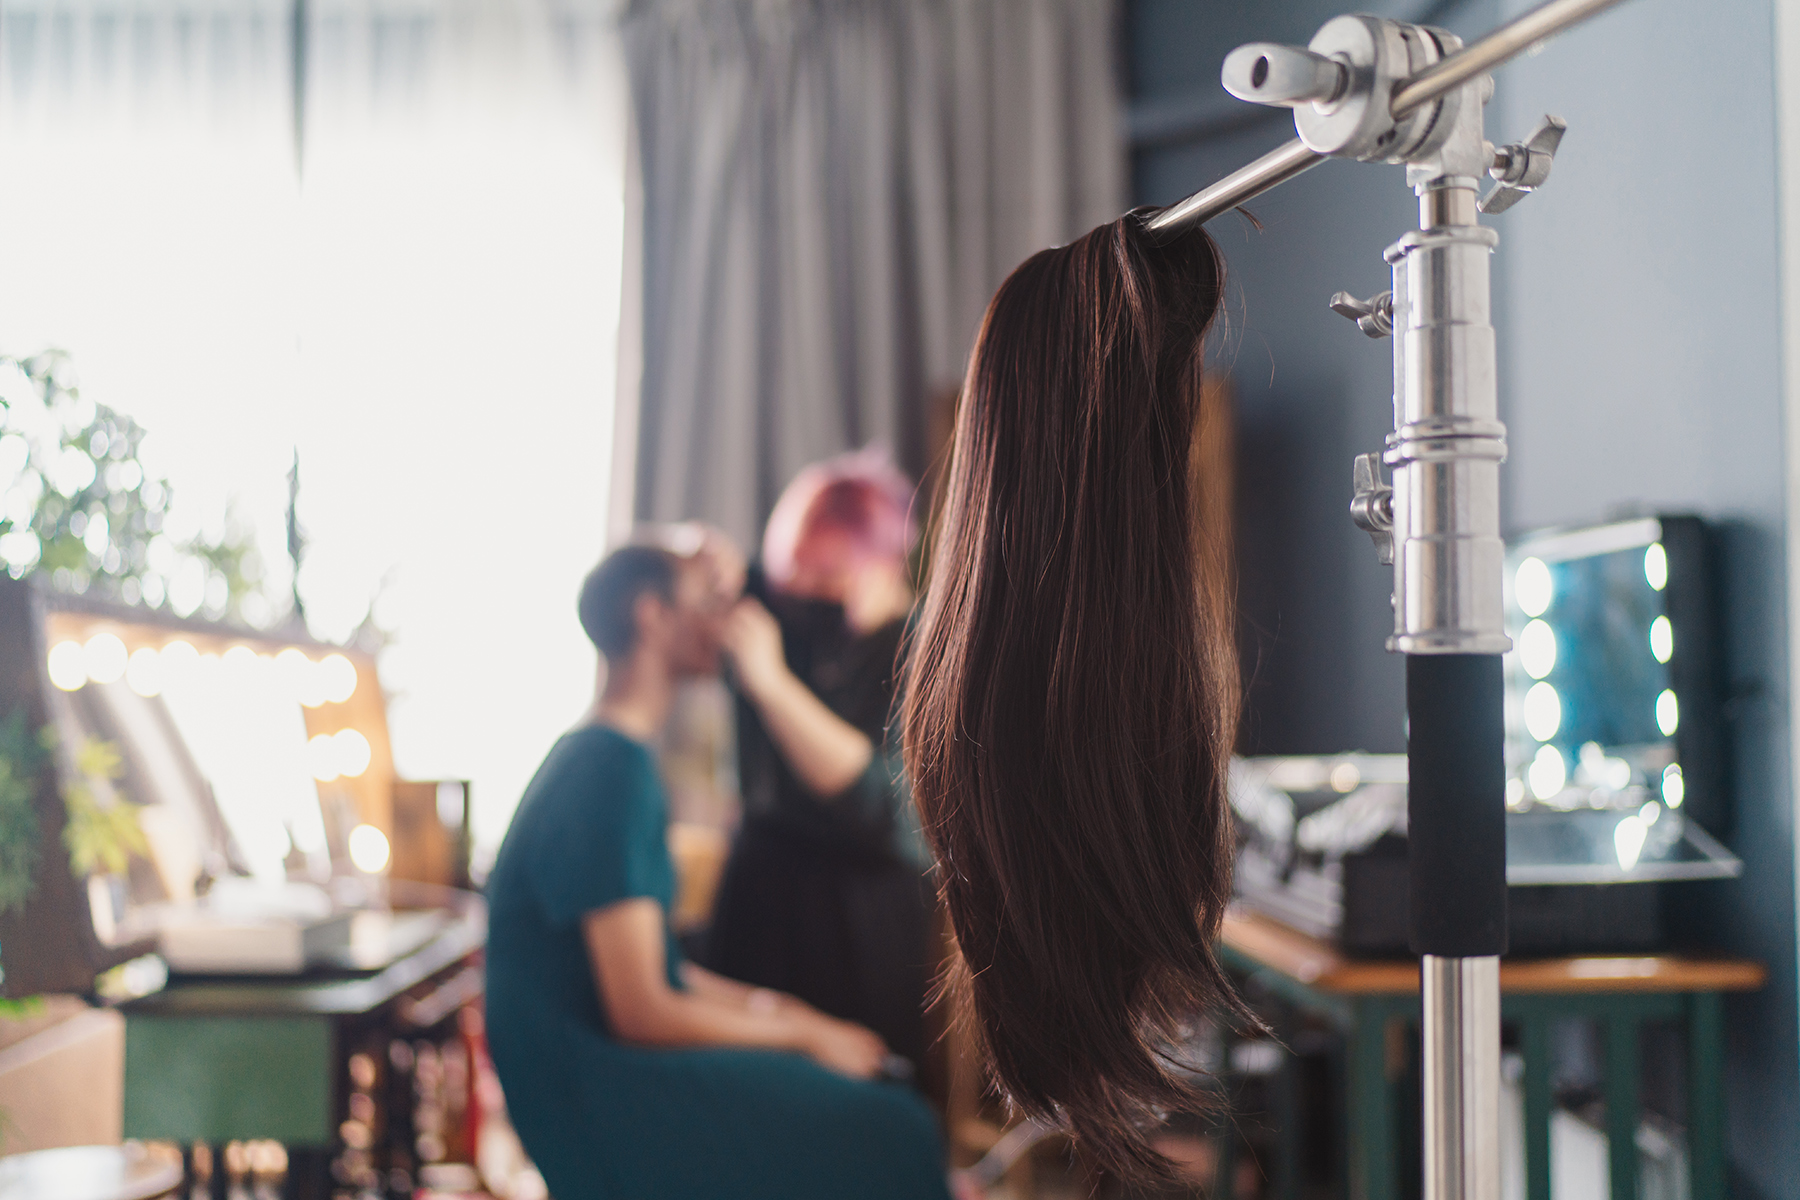 Out of focus picture of a trans woman getting ready, a wig hangs in the foreground